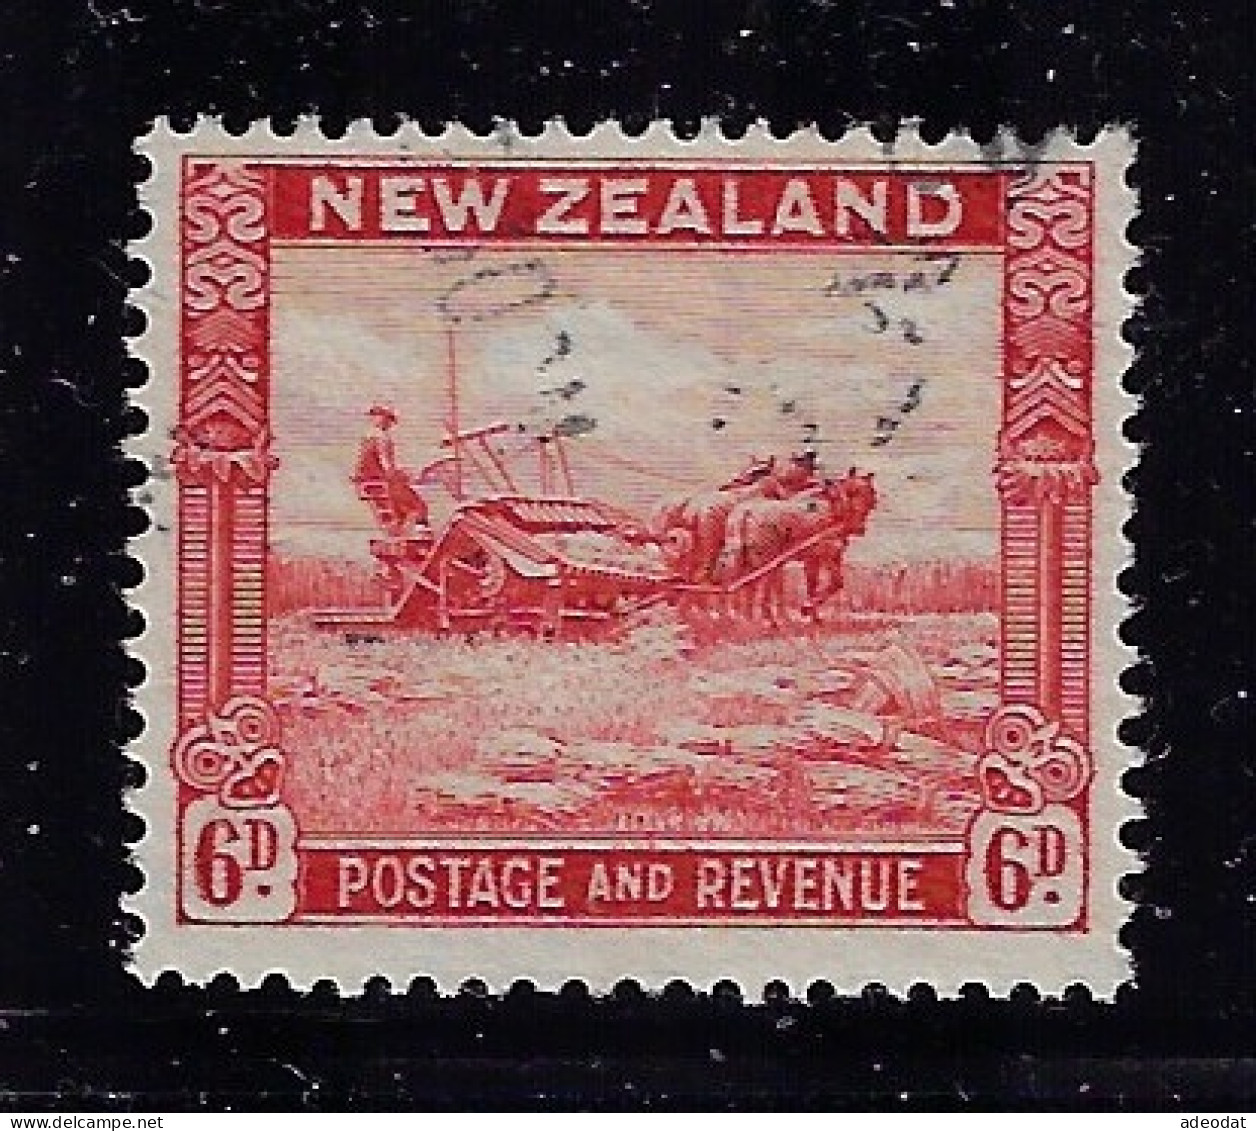 NEW ZEALAND 1935 HARVESTING  SCOTT #193 USED - Used Stamps